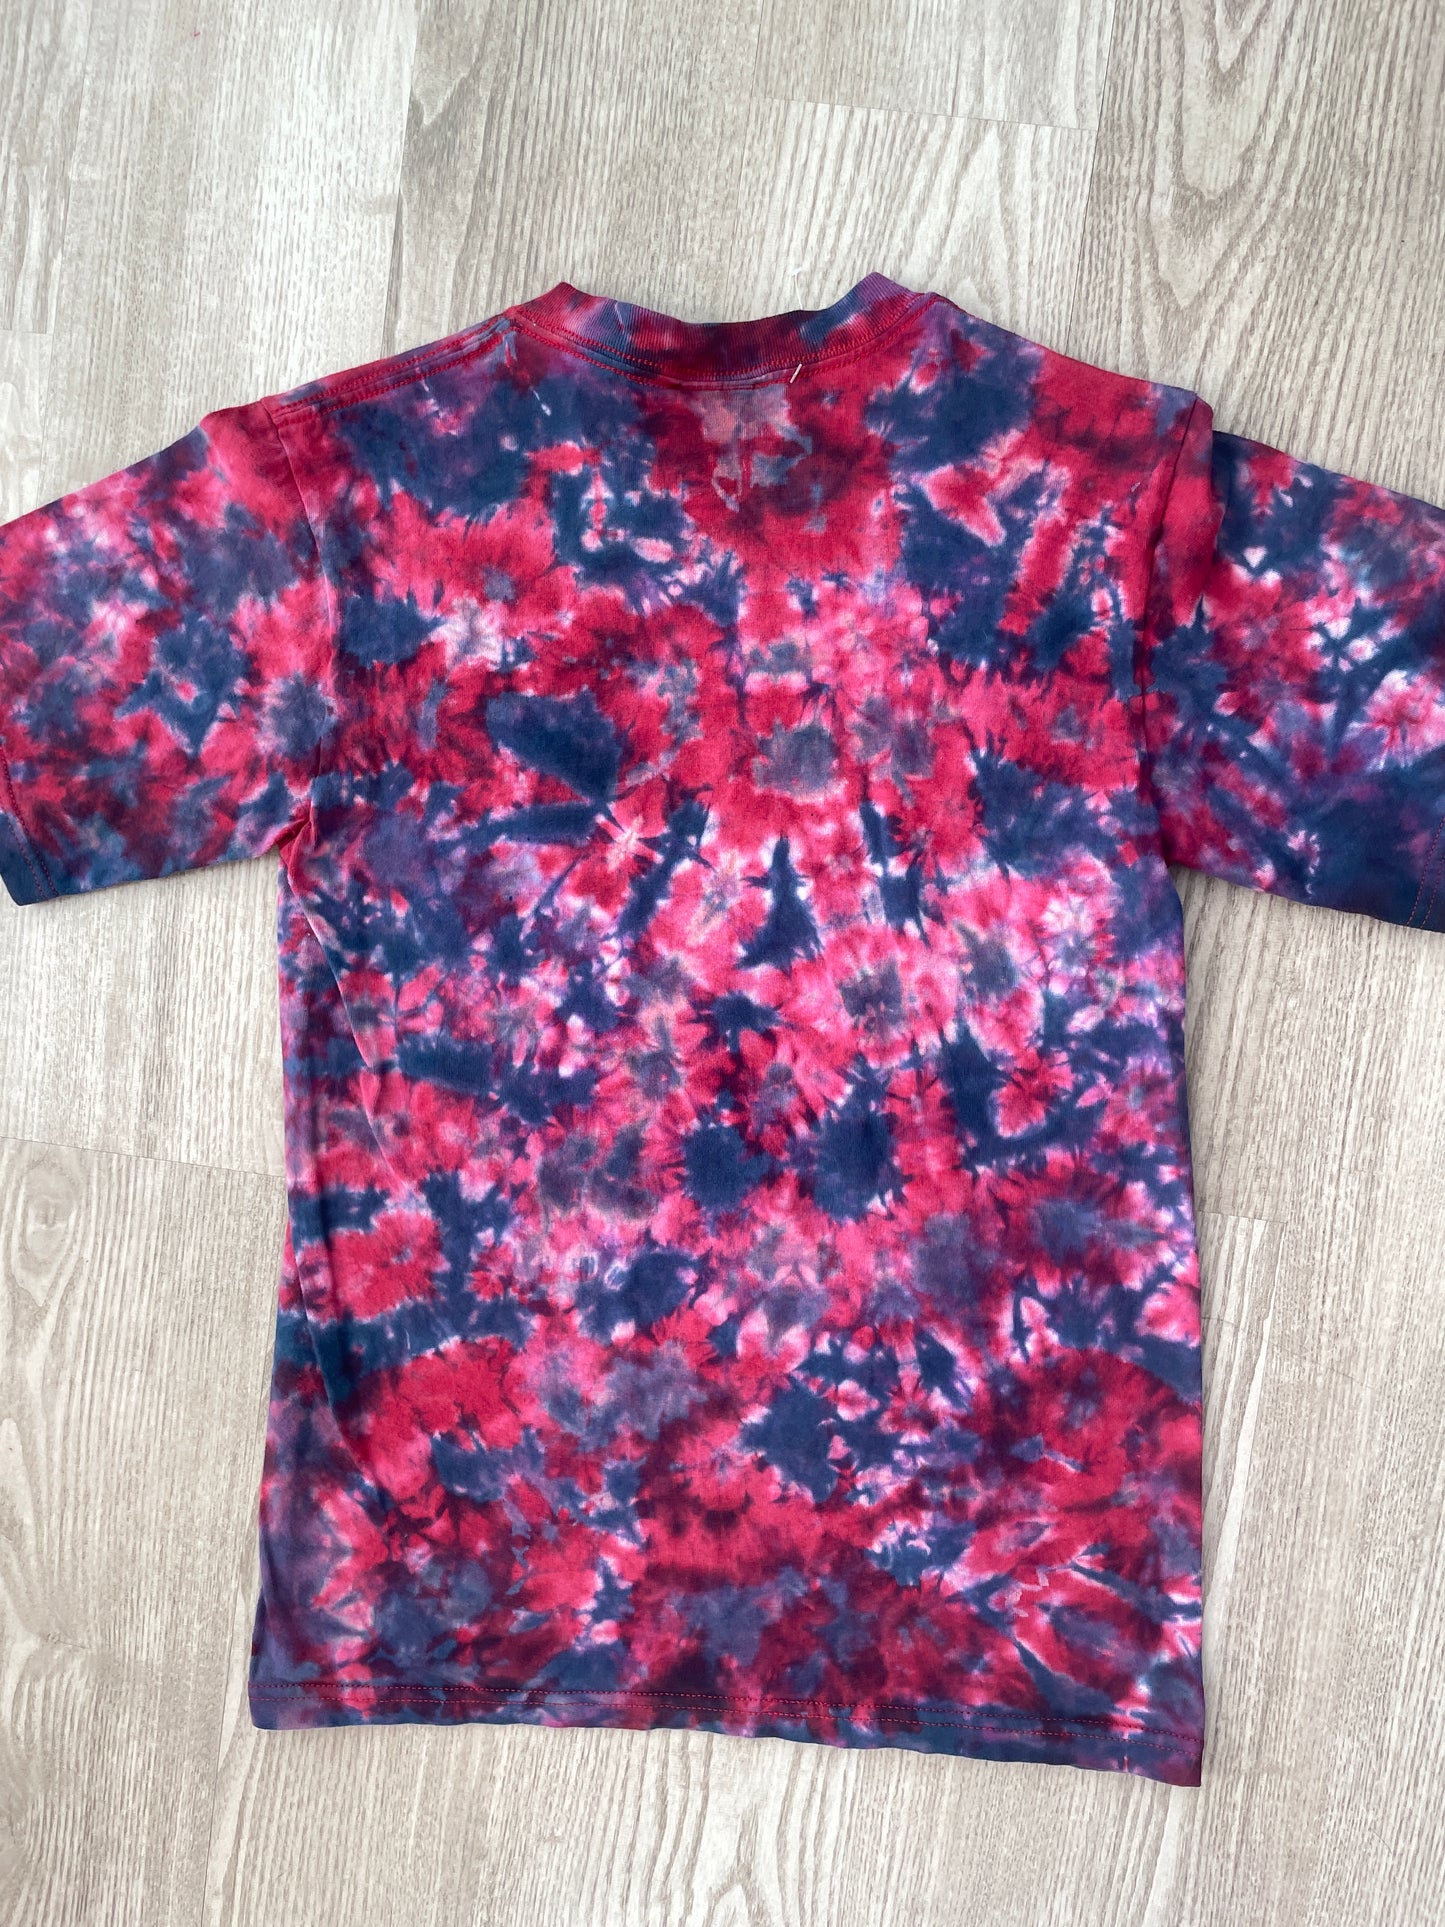 SMALL Men's Death Valley Embroidered Reverse Tie Dye Handmade Short Sleeve T-Shirt | One-Of-a-Kind Upcycled Red and Blue Crumpled Top